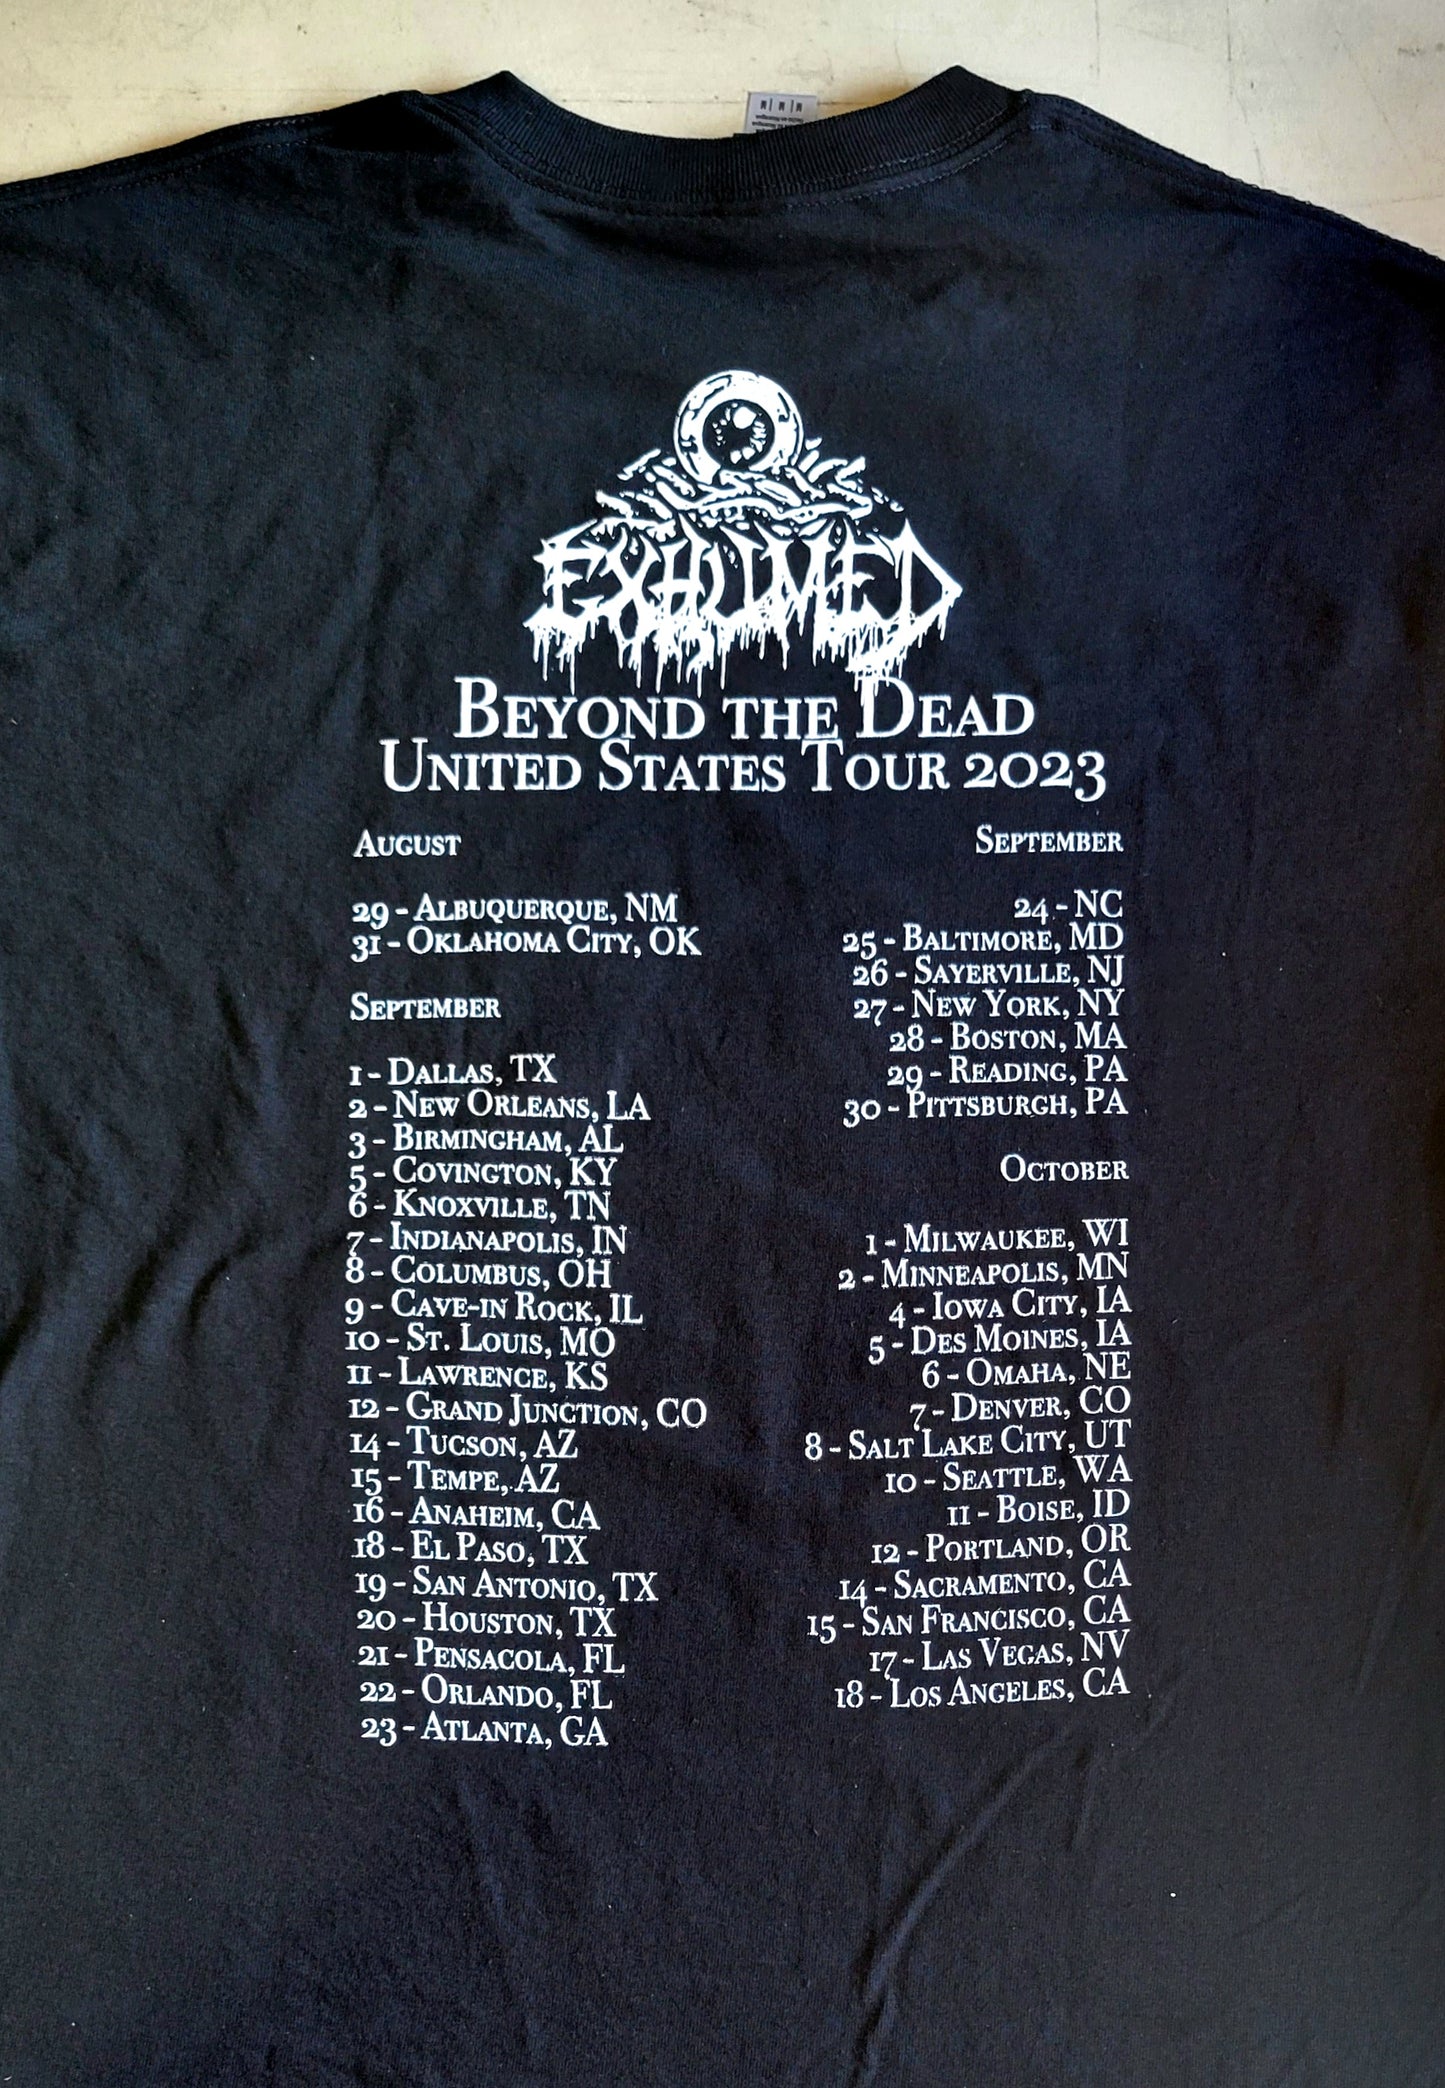 EXHUMED "Beyond the Dead" 2023 Tour TS